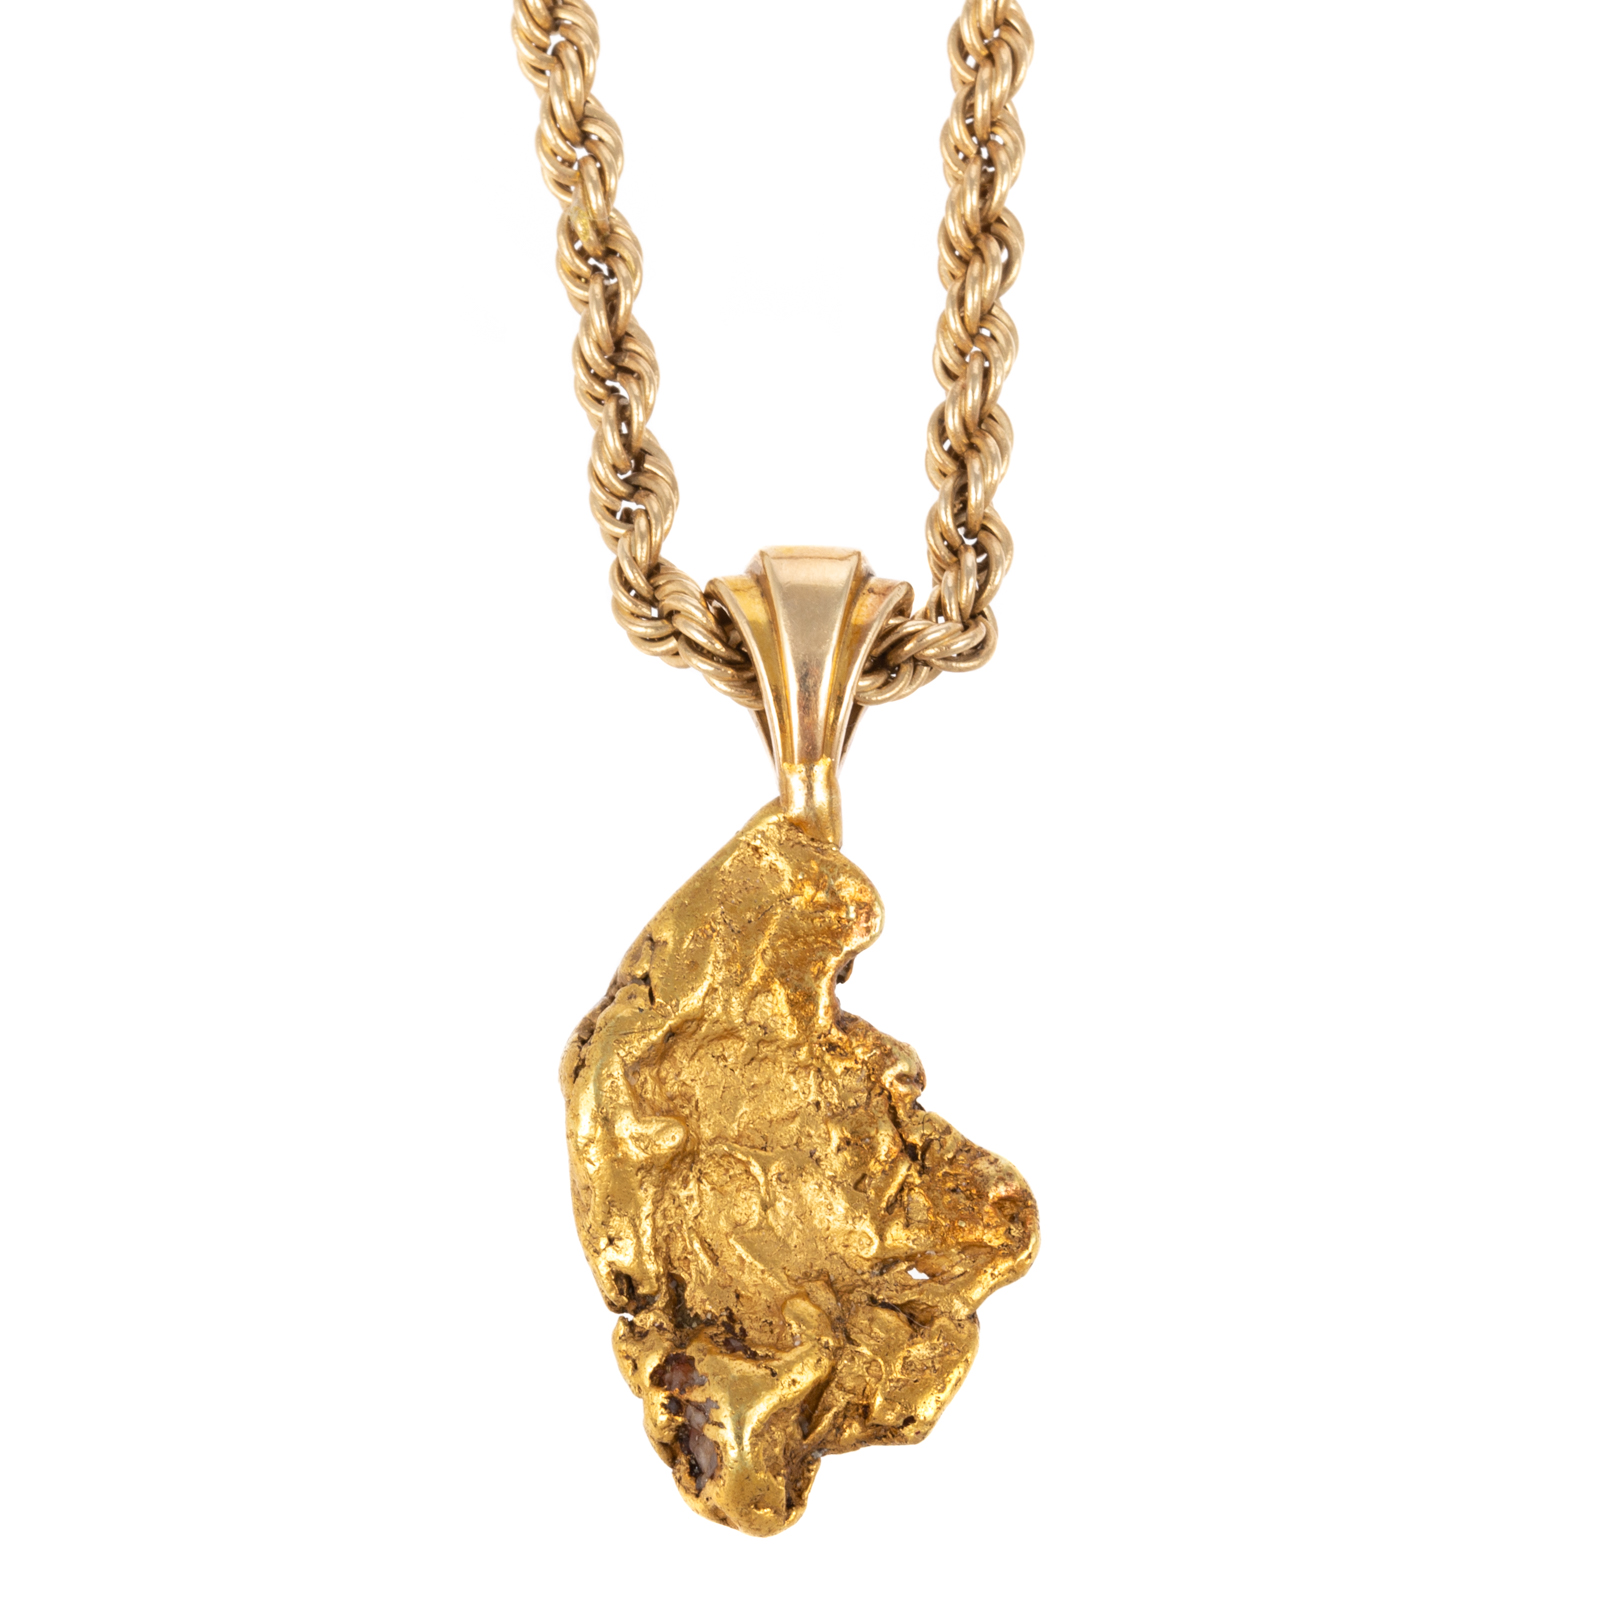 A GOLD NUGGET PENDANT & ROPE CHAIN